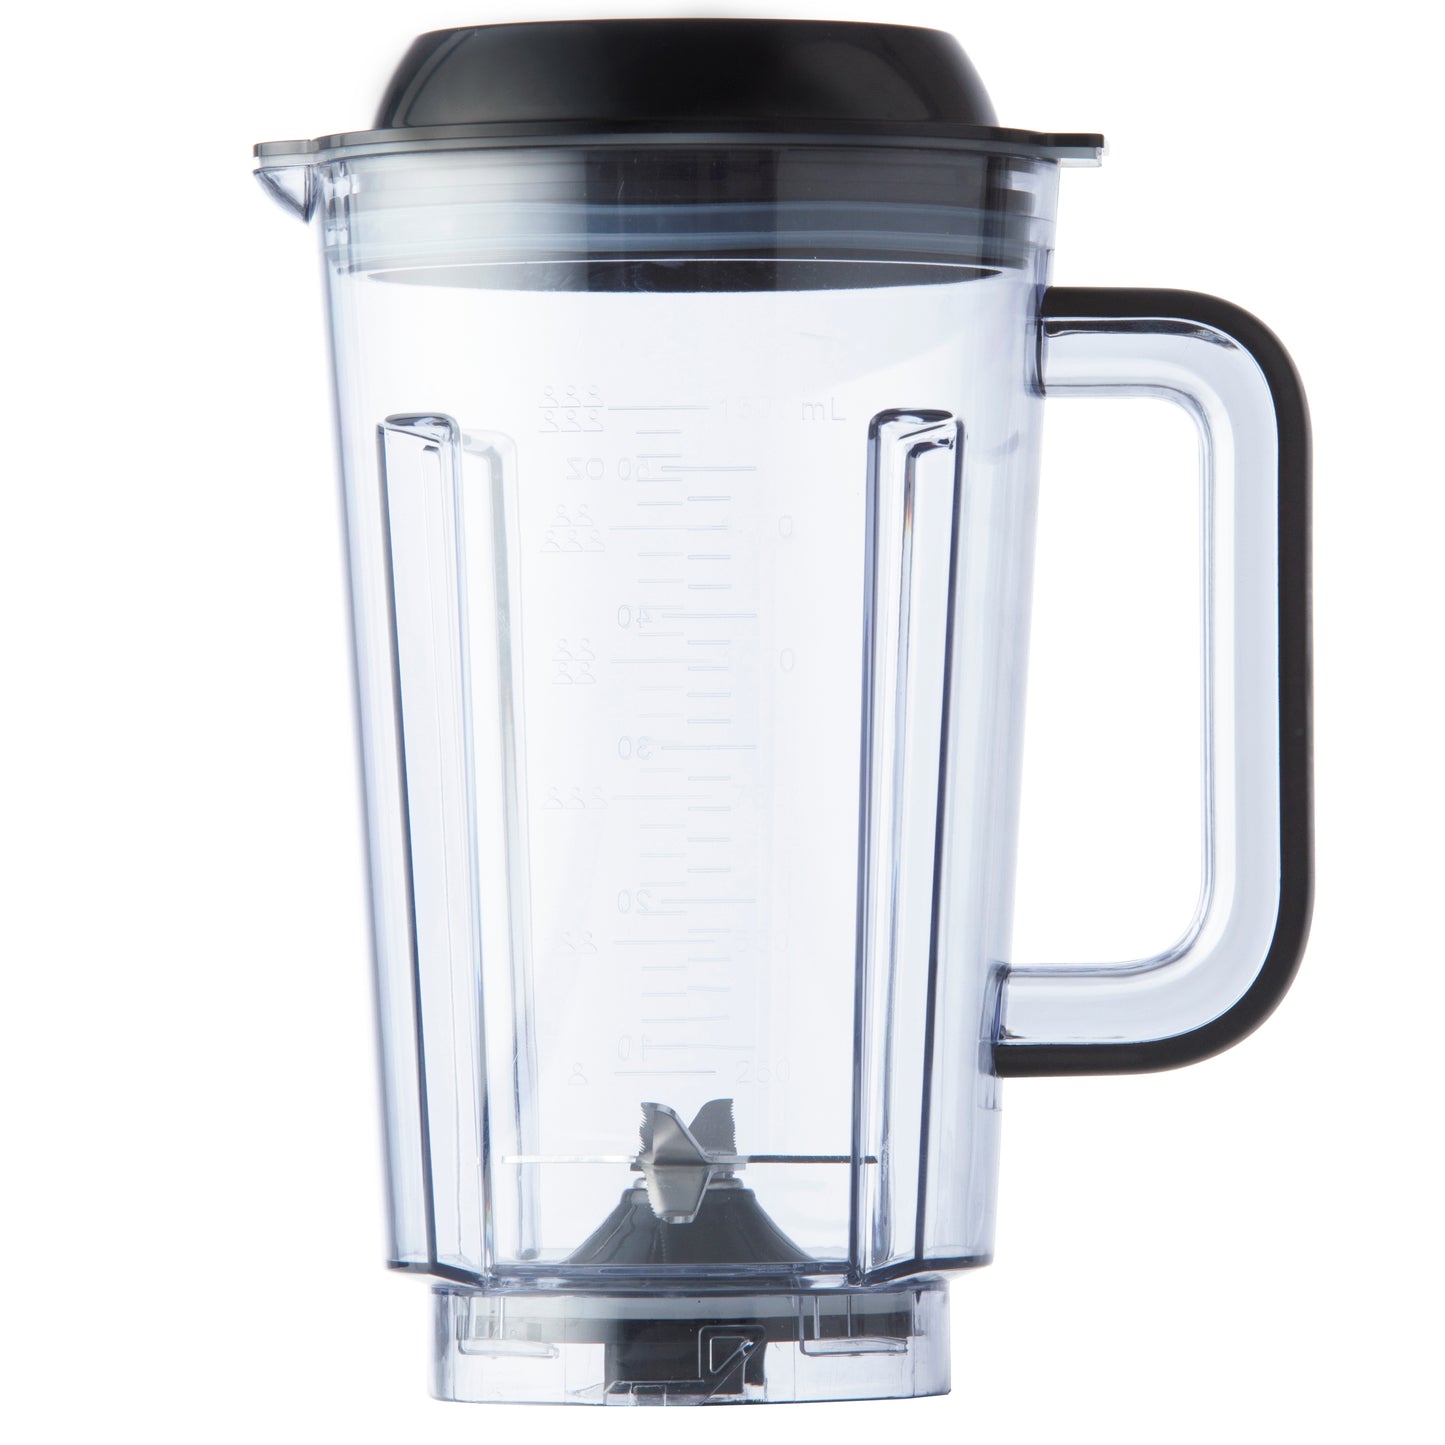 Trebs 99349 - Vacuum Blender / Comfortjuicer with 5 functions and plastic 1.5 l jug